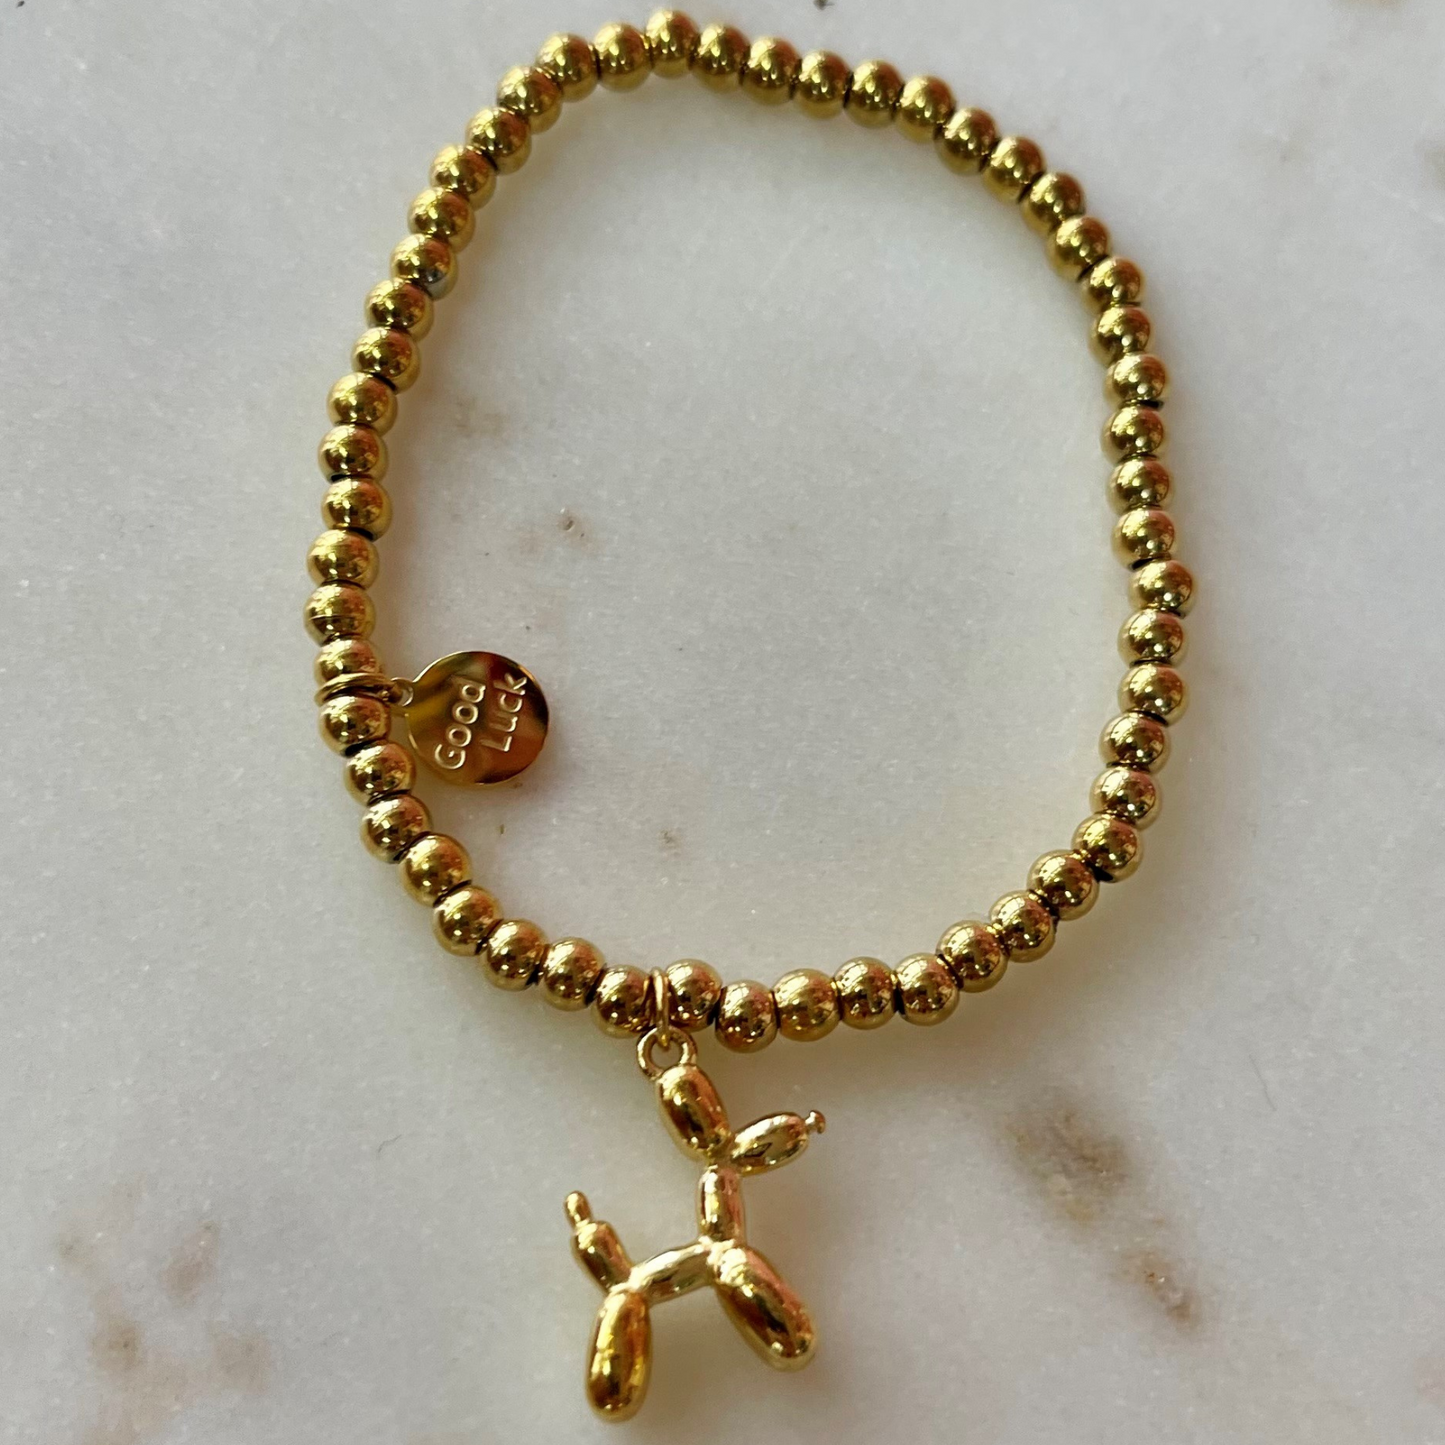 gold band bracelet with Good Luck charm and a gold balloon shaped dog